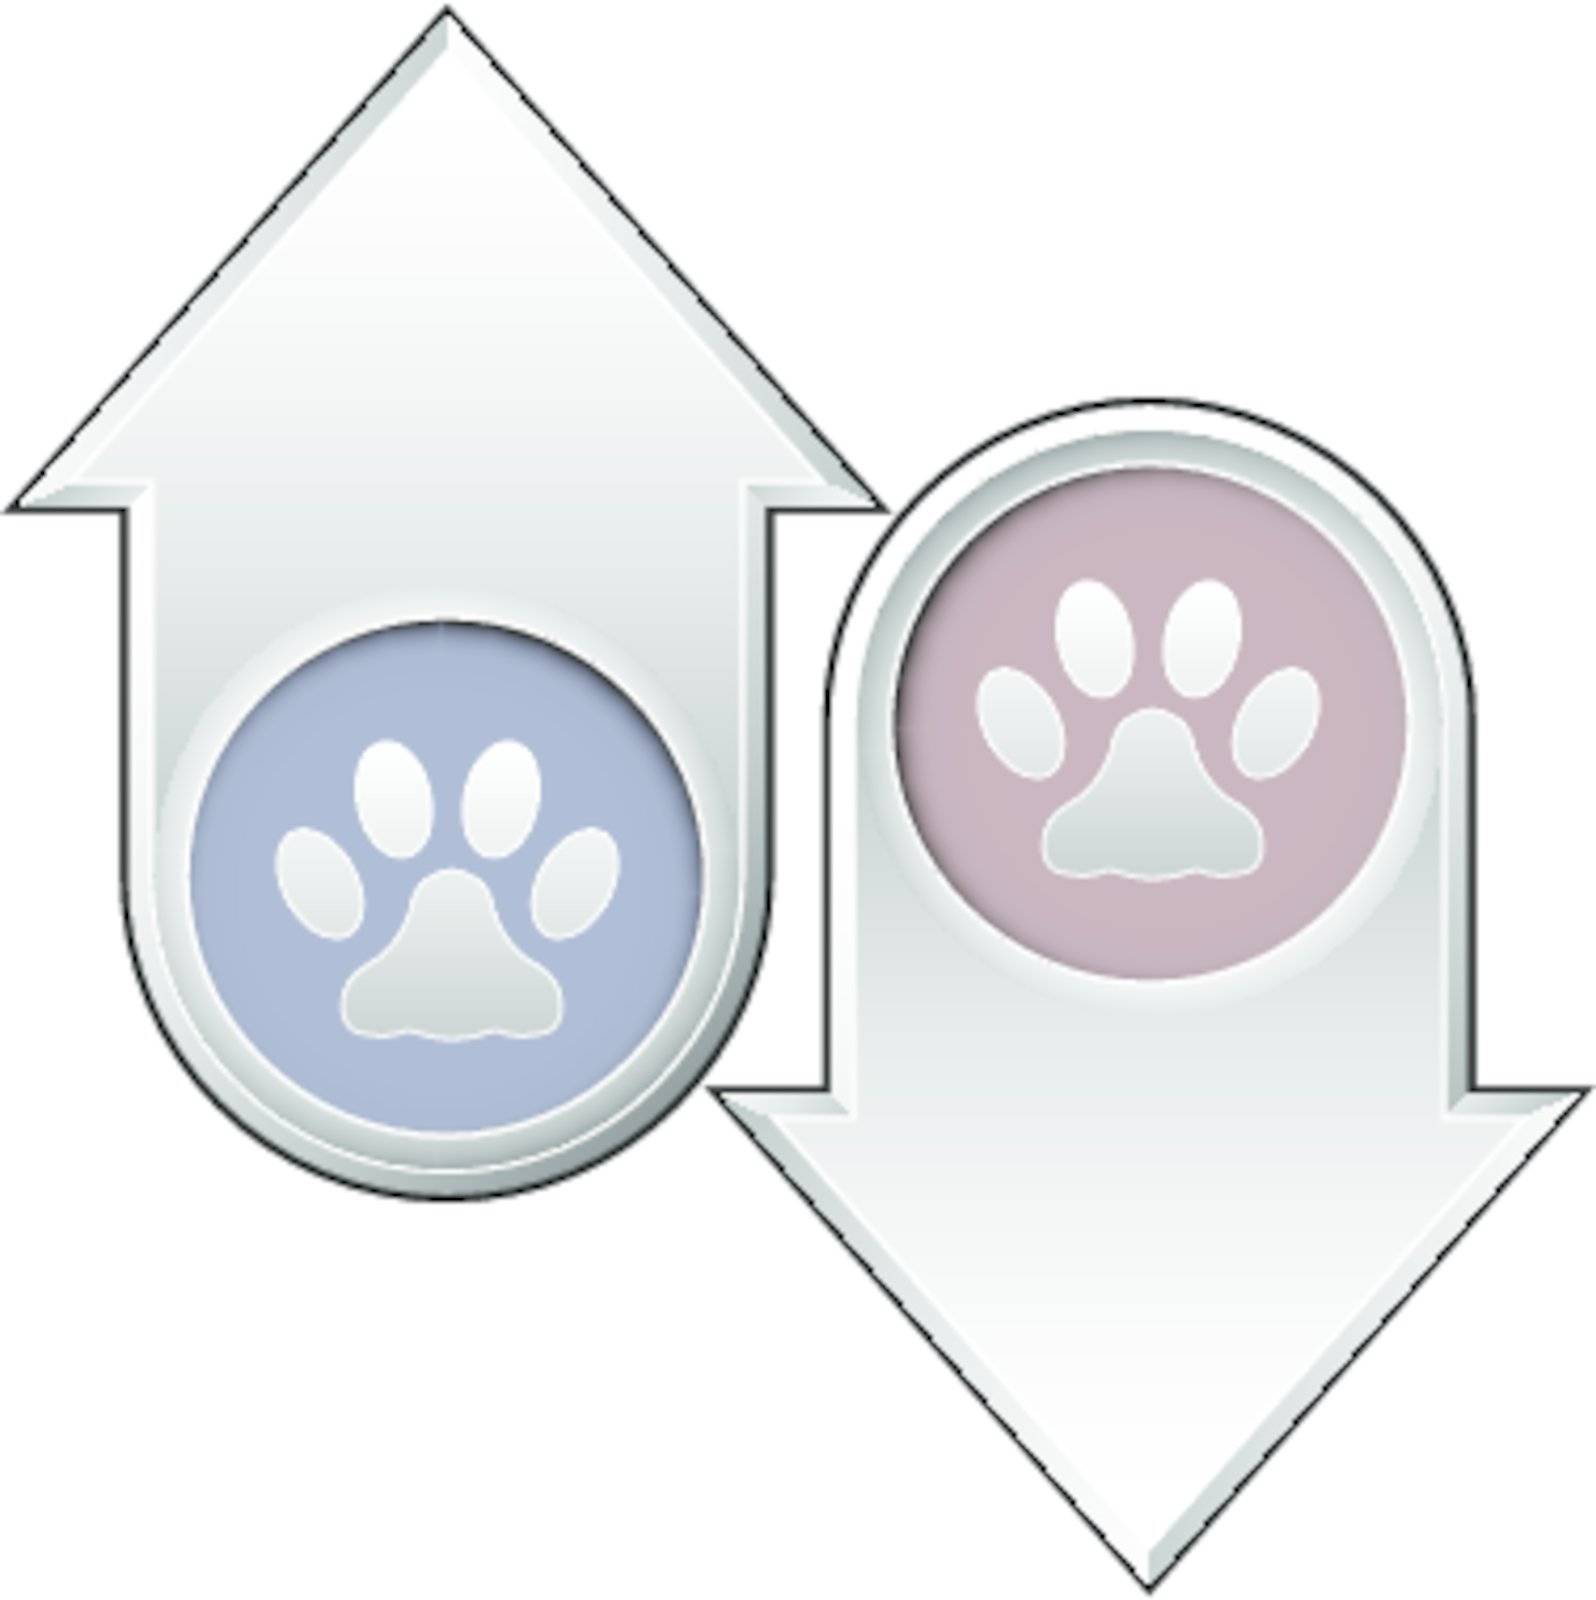 More or less pets icons by lhfgraphics